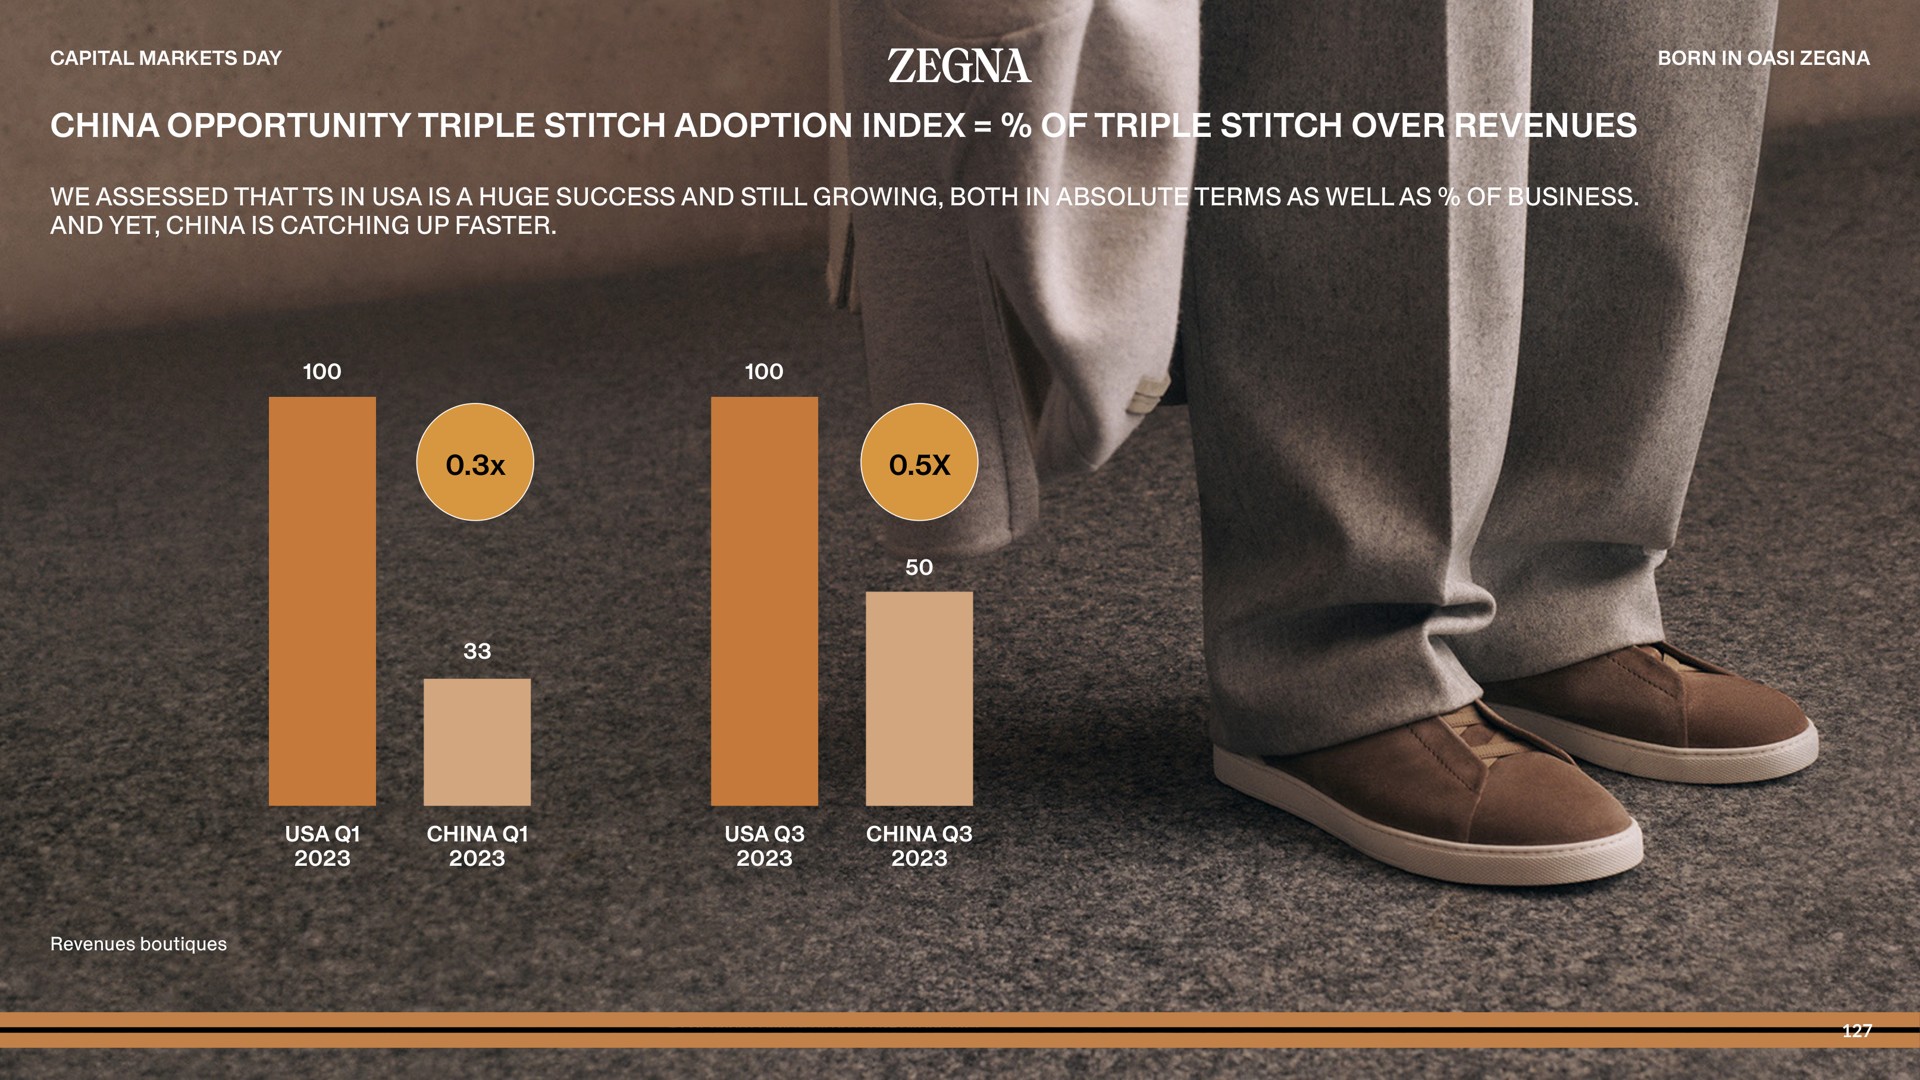 china opportunity triple stitch adoption index of triple stitch over revenues capital markets day | Zegna